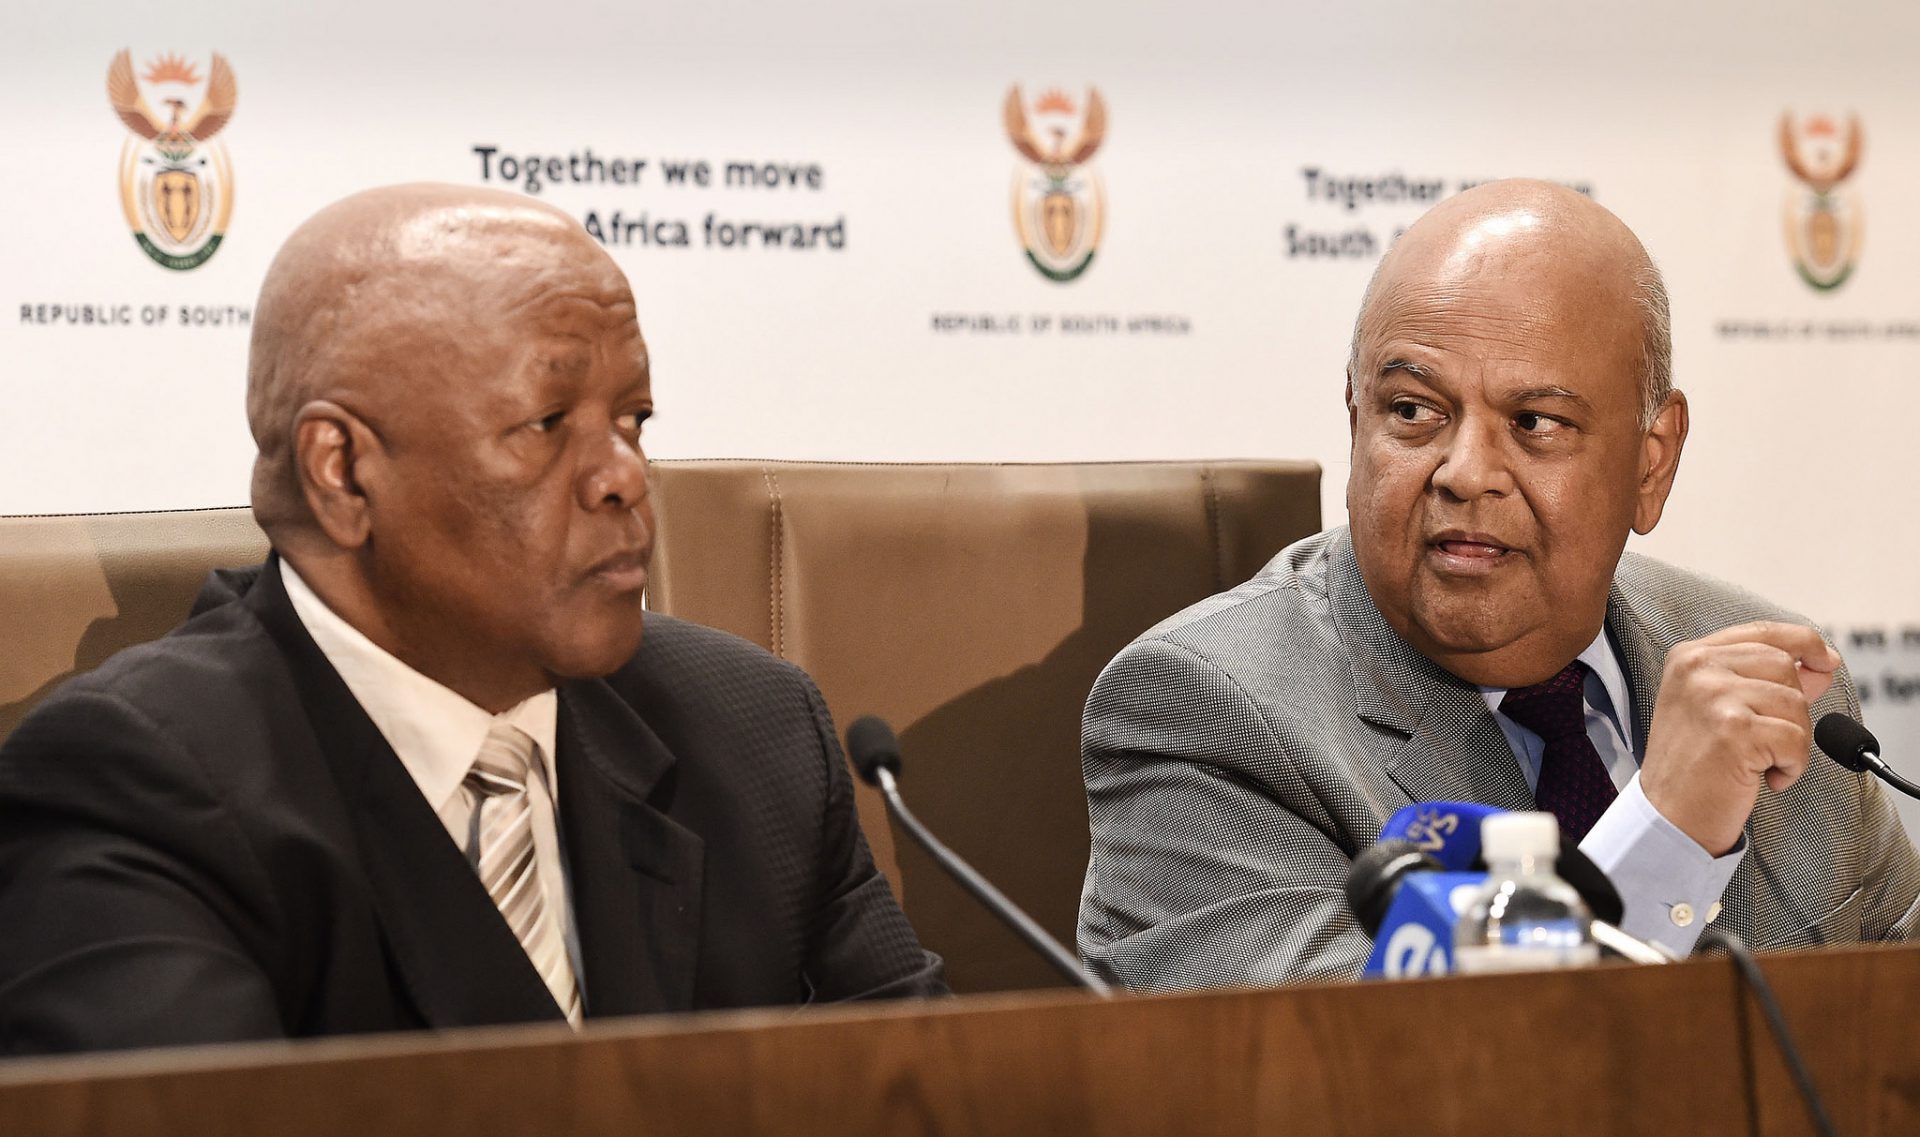 Minister in the Presidency responsible for Planning, Monitoring and Evaluation, Jeff Radebe and Minister of Finance Pravin Gordhan brief media on the outcomes of the Special Cabinet meeting held on the 13 January 2016, held at Tshedimosetso House in Pretoria.